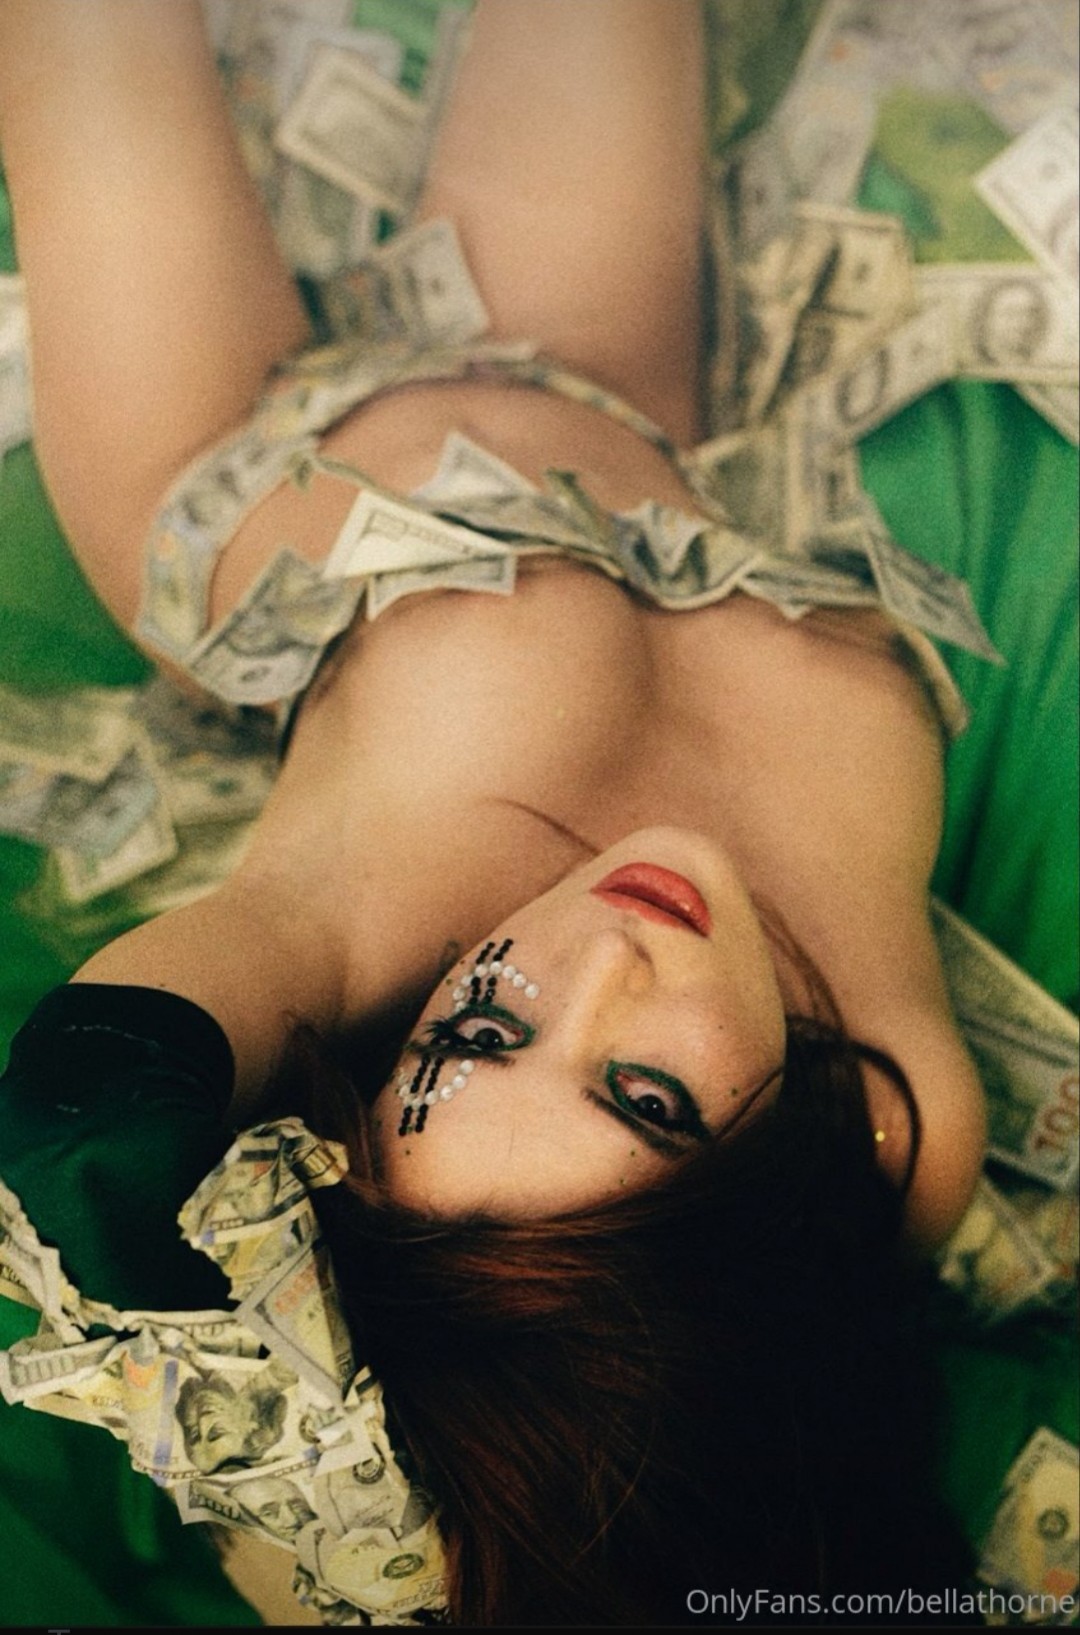 Bella Thorne Covered By Dollars TheFappeningPro 4 - Bella Thorne Covers Her Tits With Dollars (4 Photos)